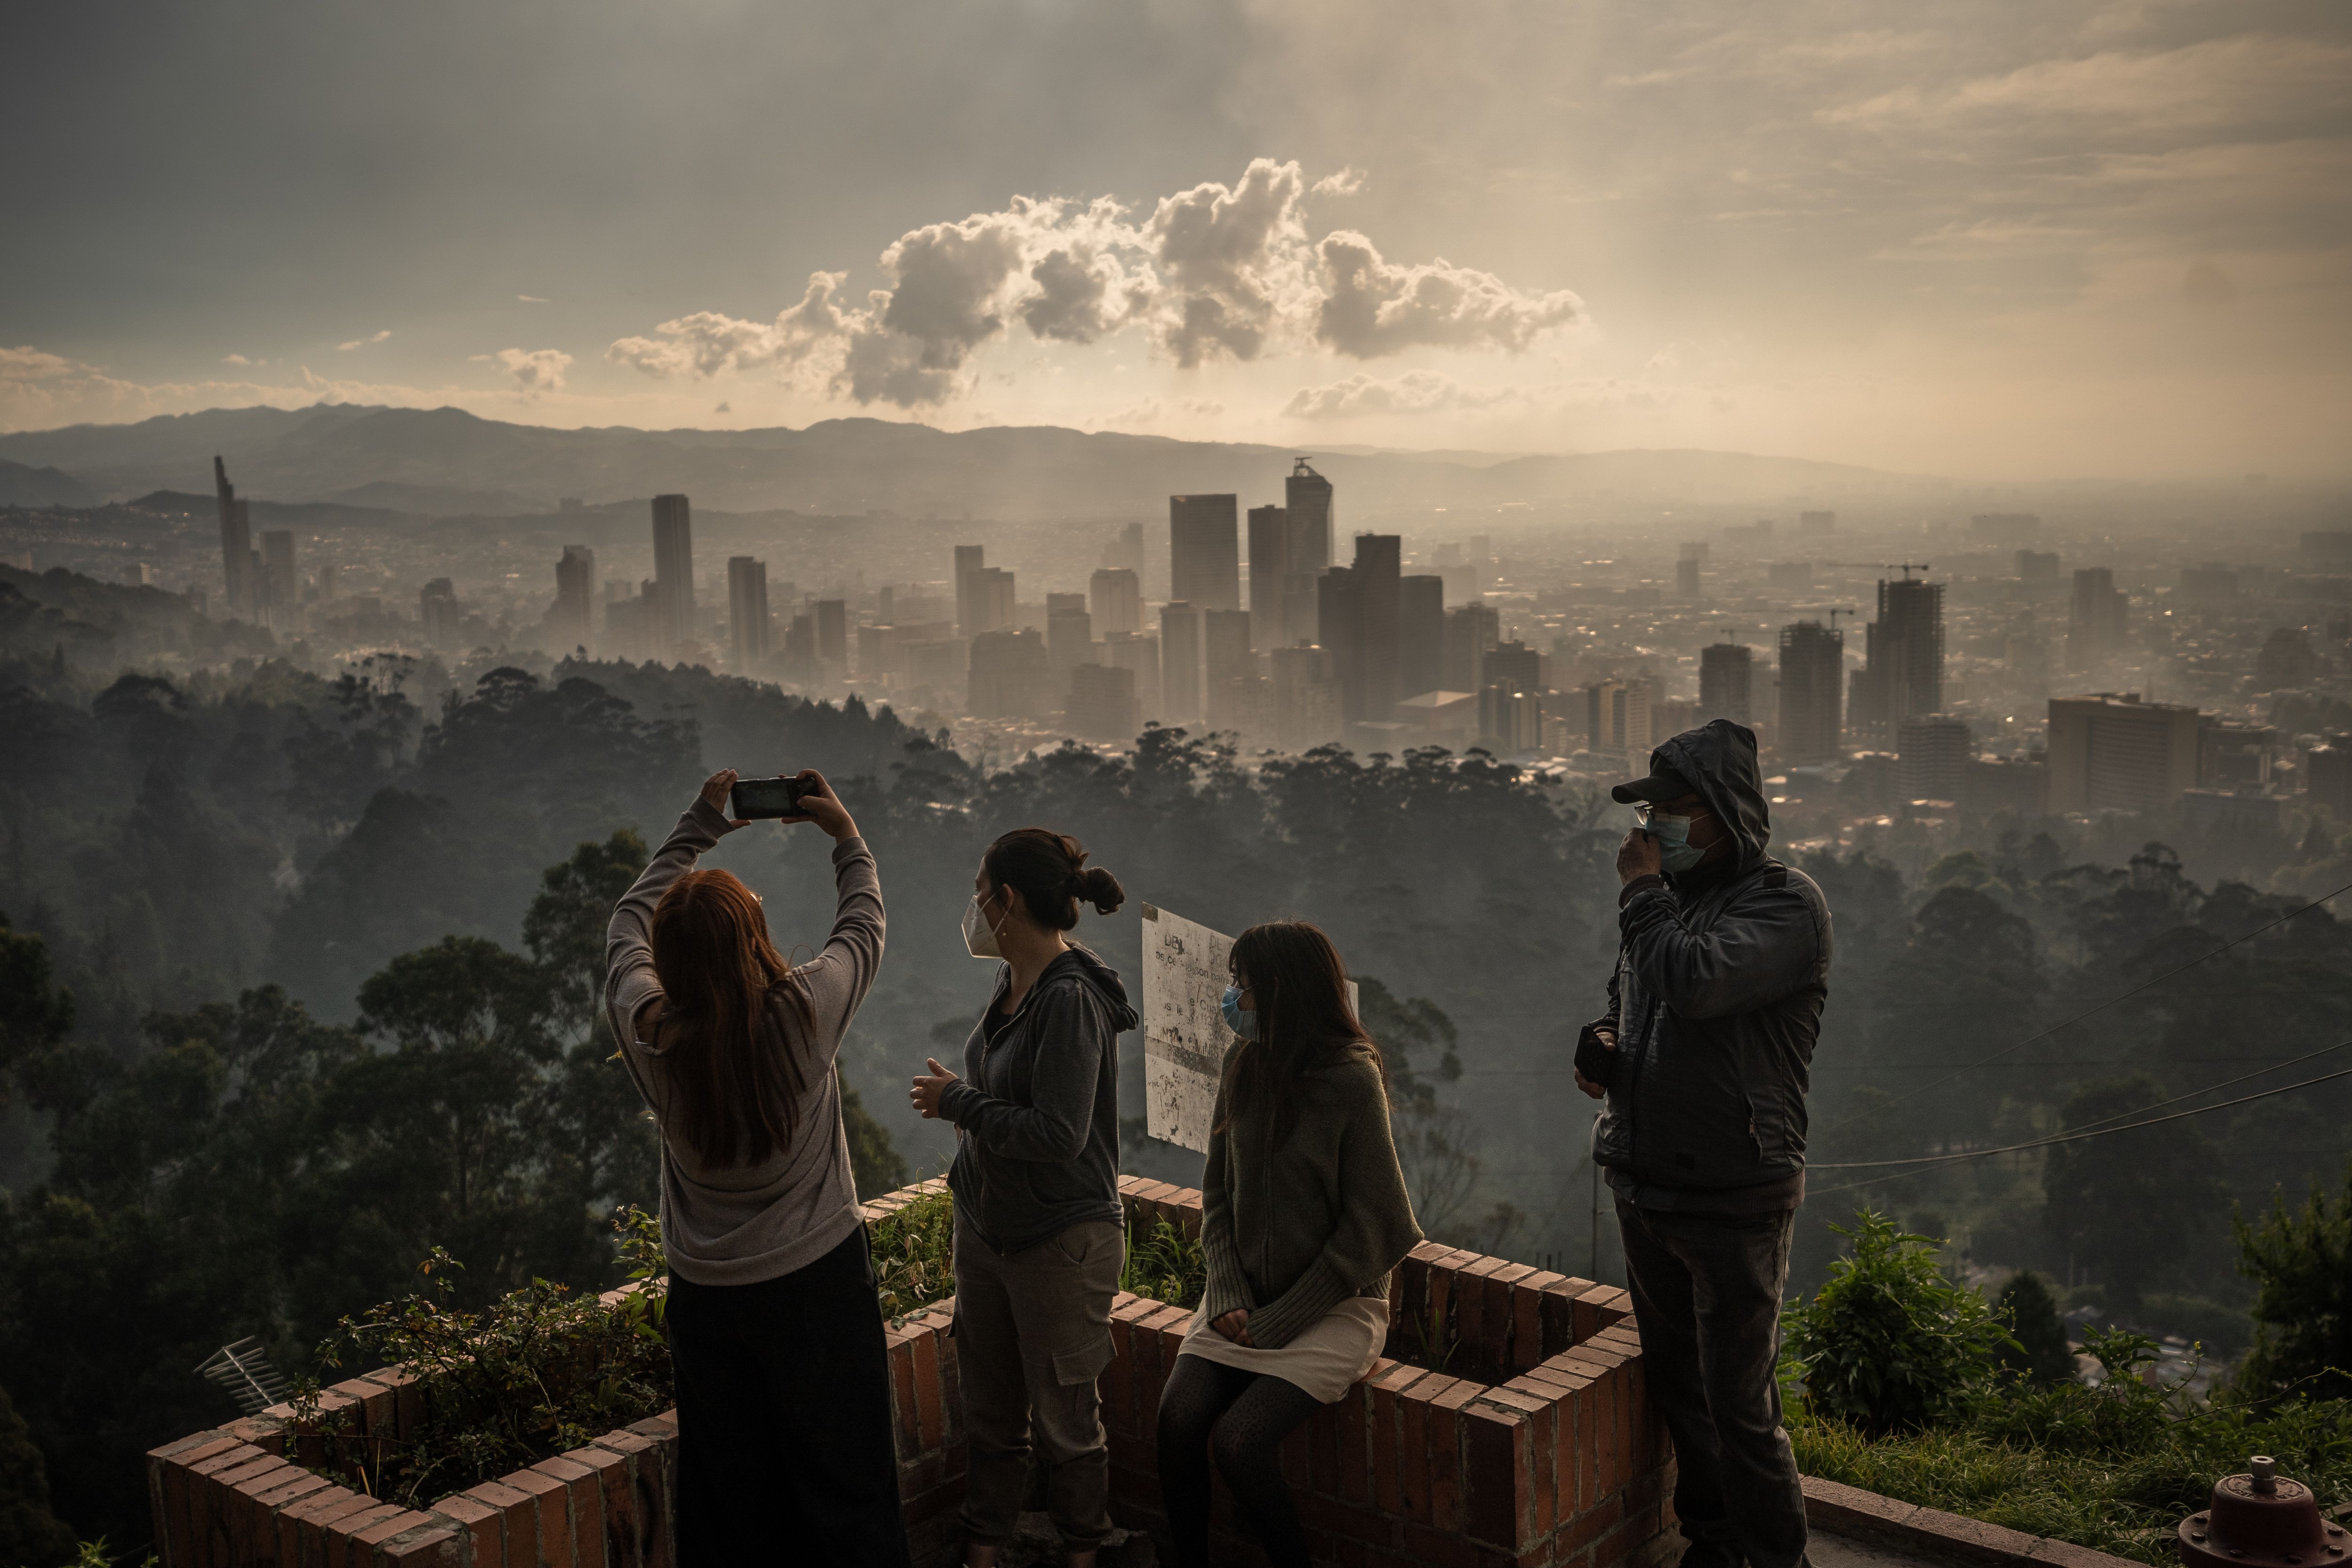 People taking photos above Bogota, with the air extremely hazy from smoke. 